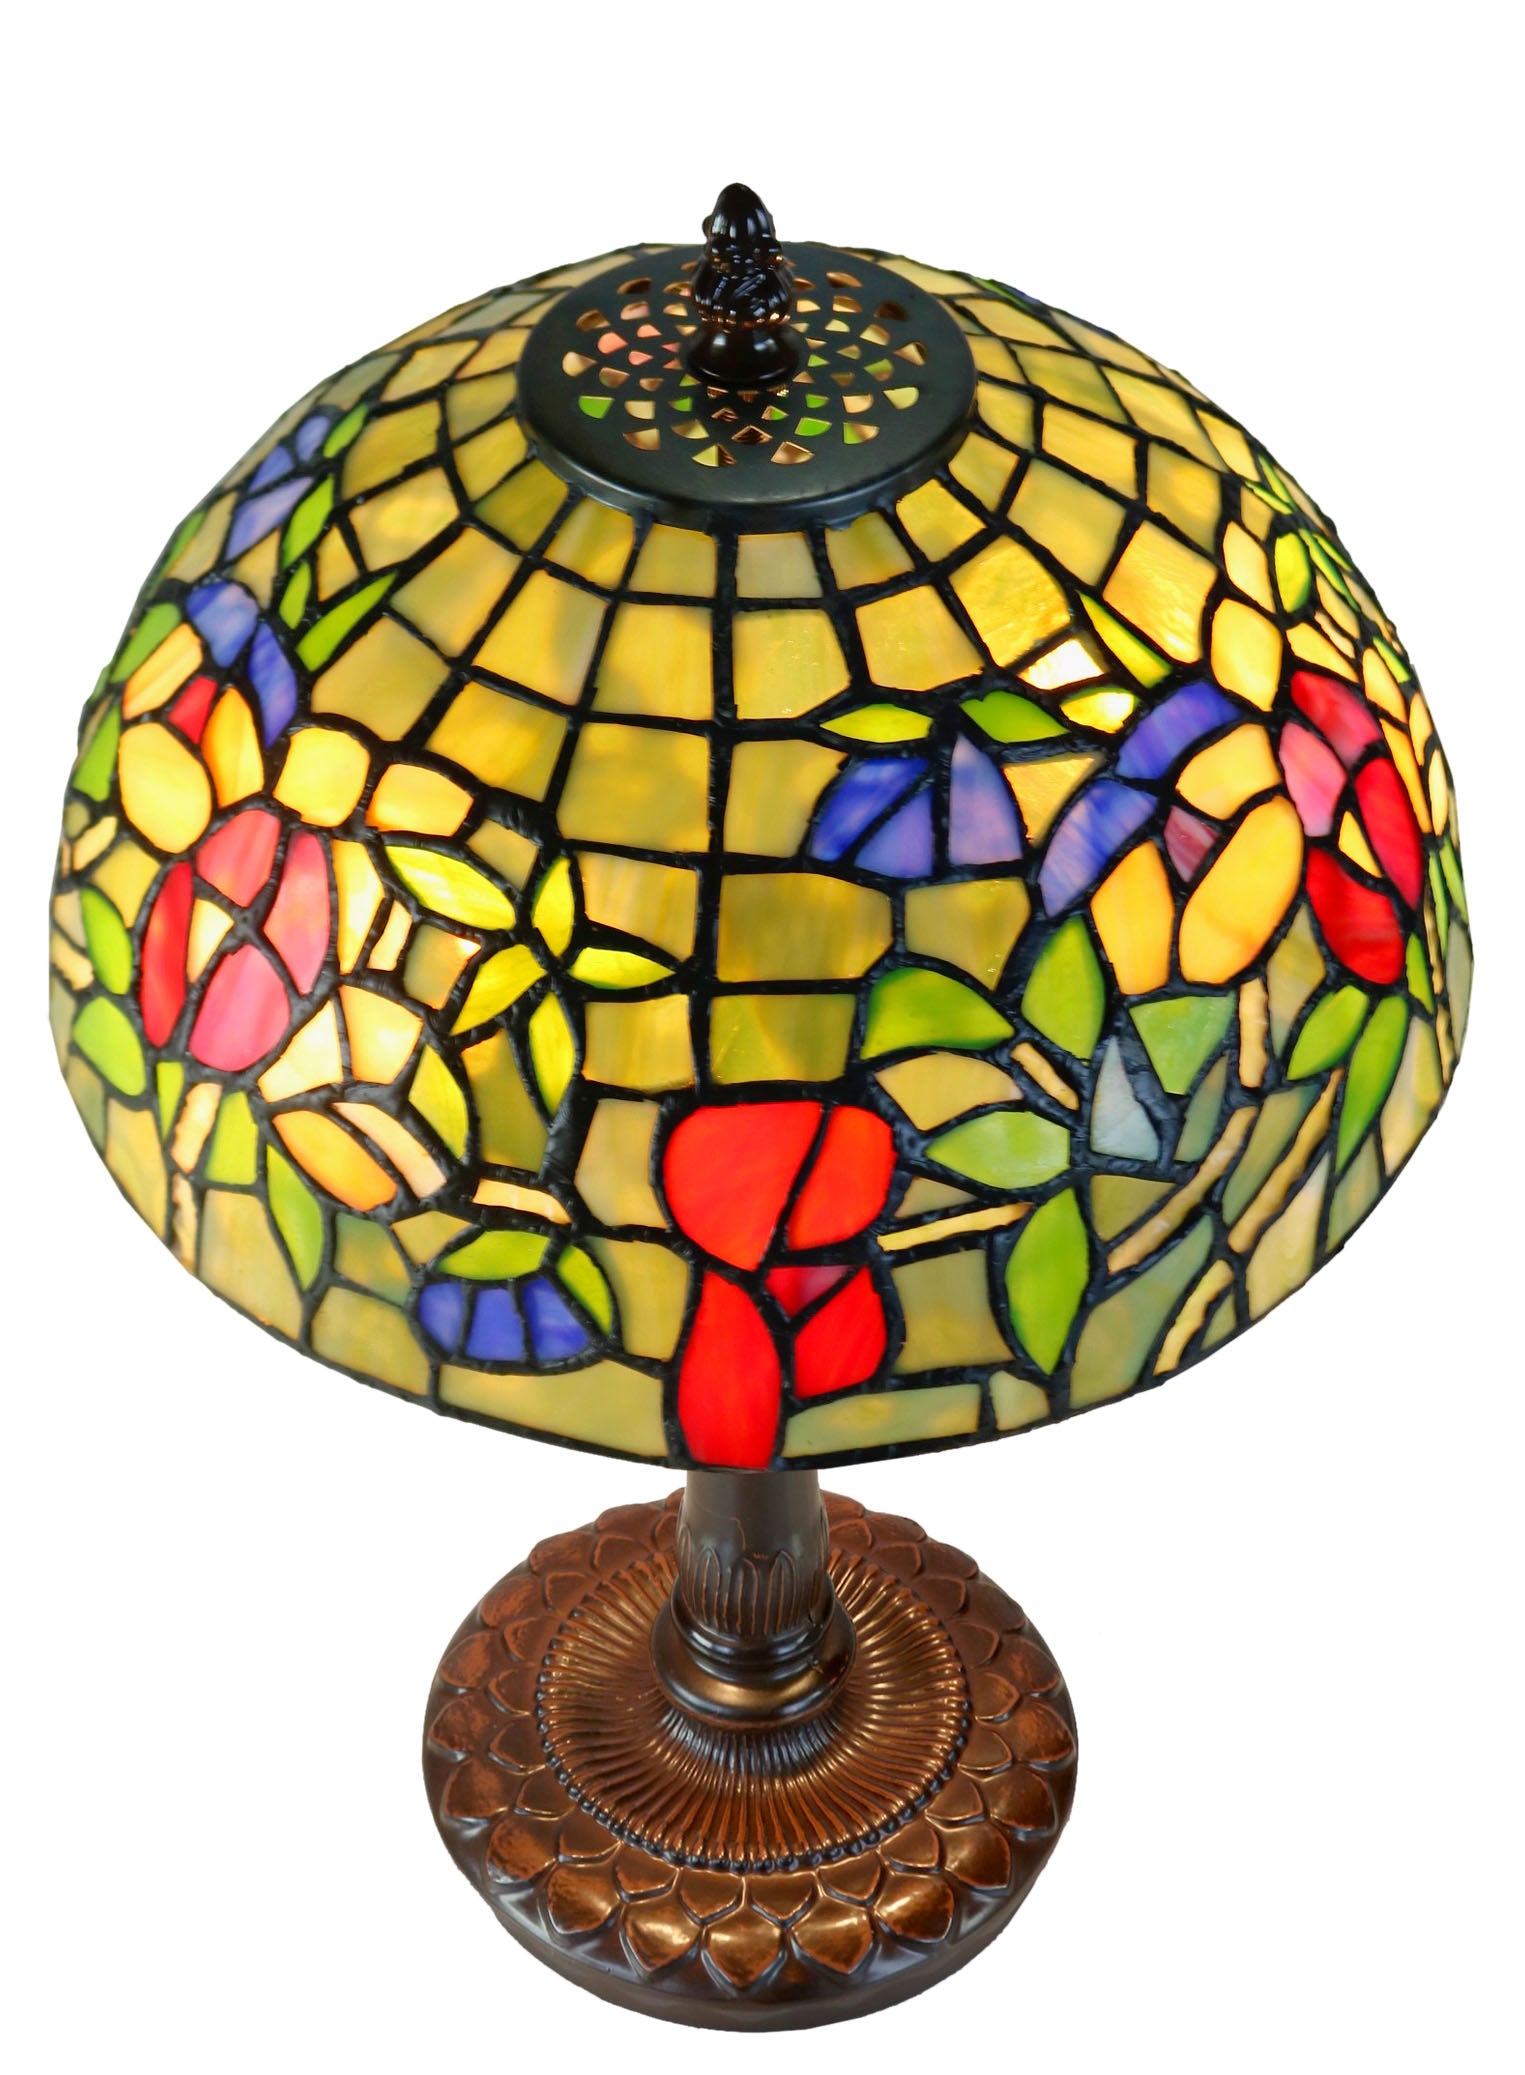 Limited Edition "Exquisite 10" @10” wide Flower Style Iris Tiffany Bedside Lamp